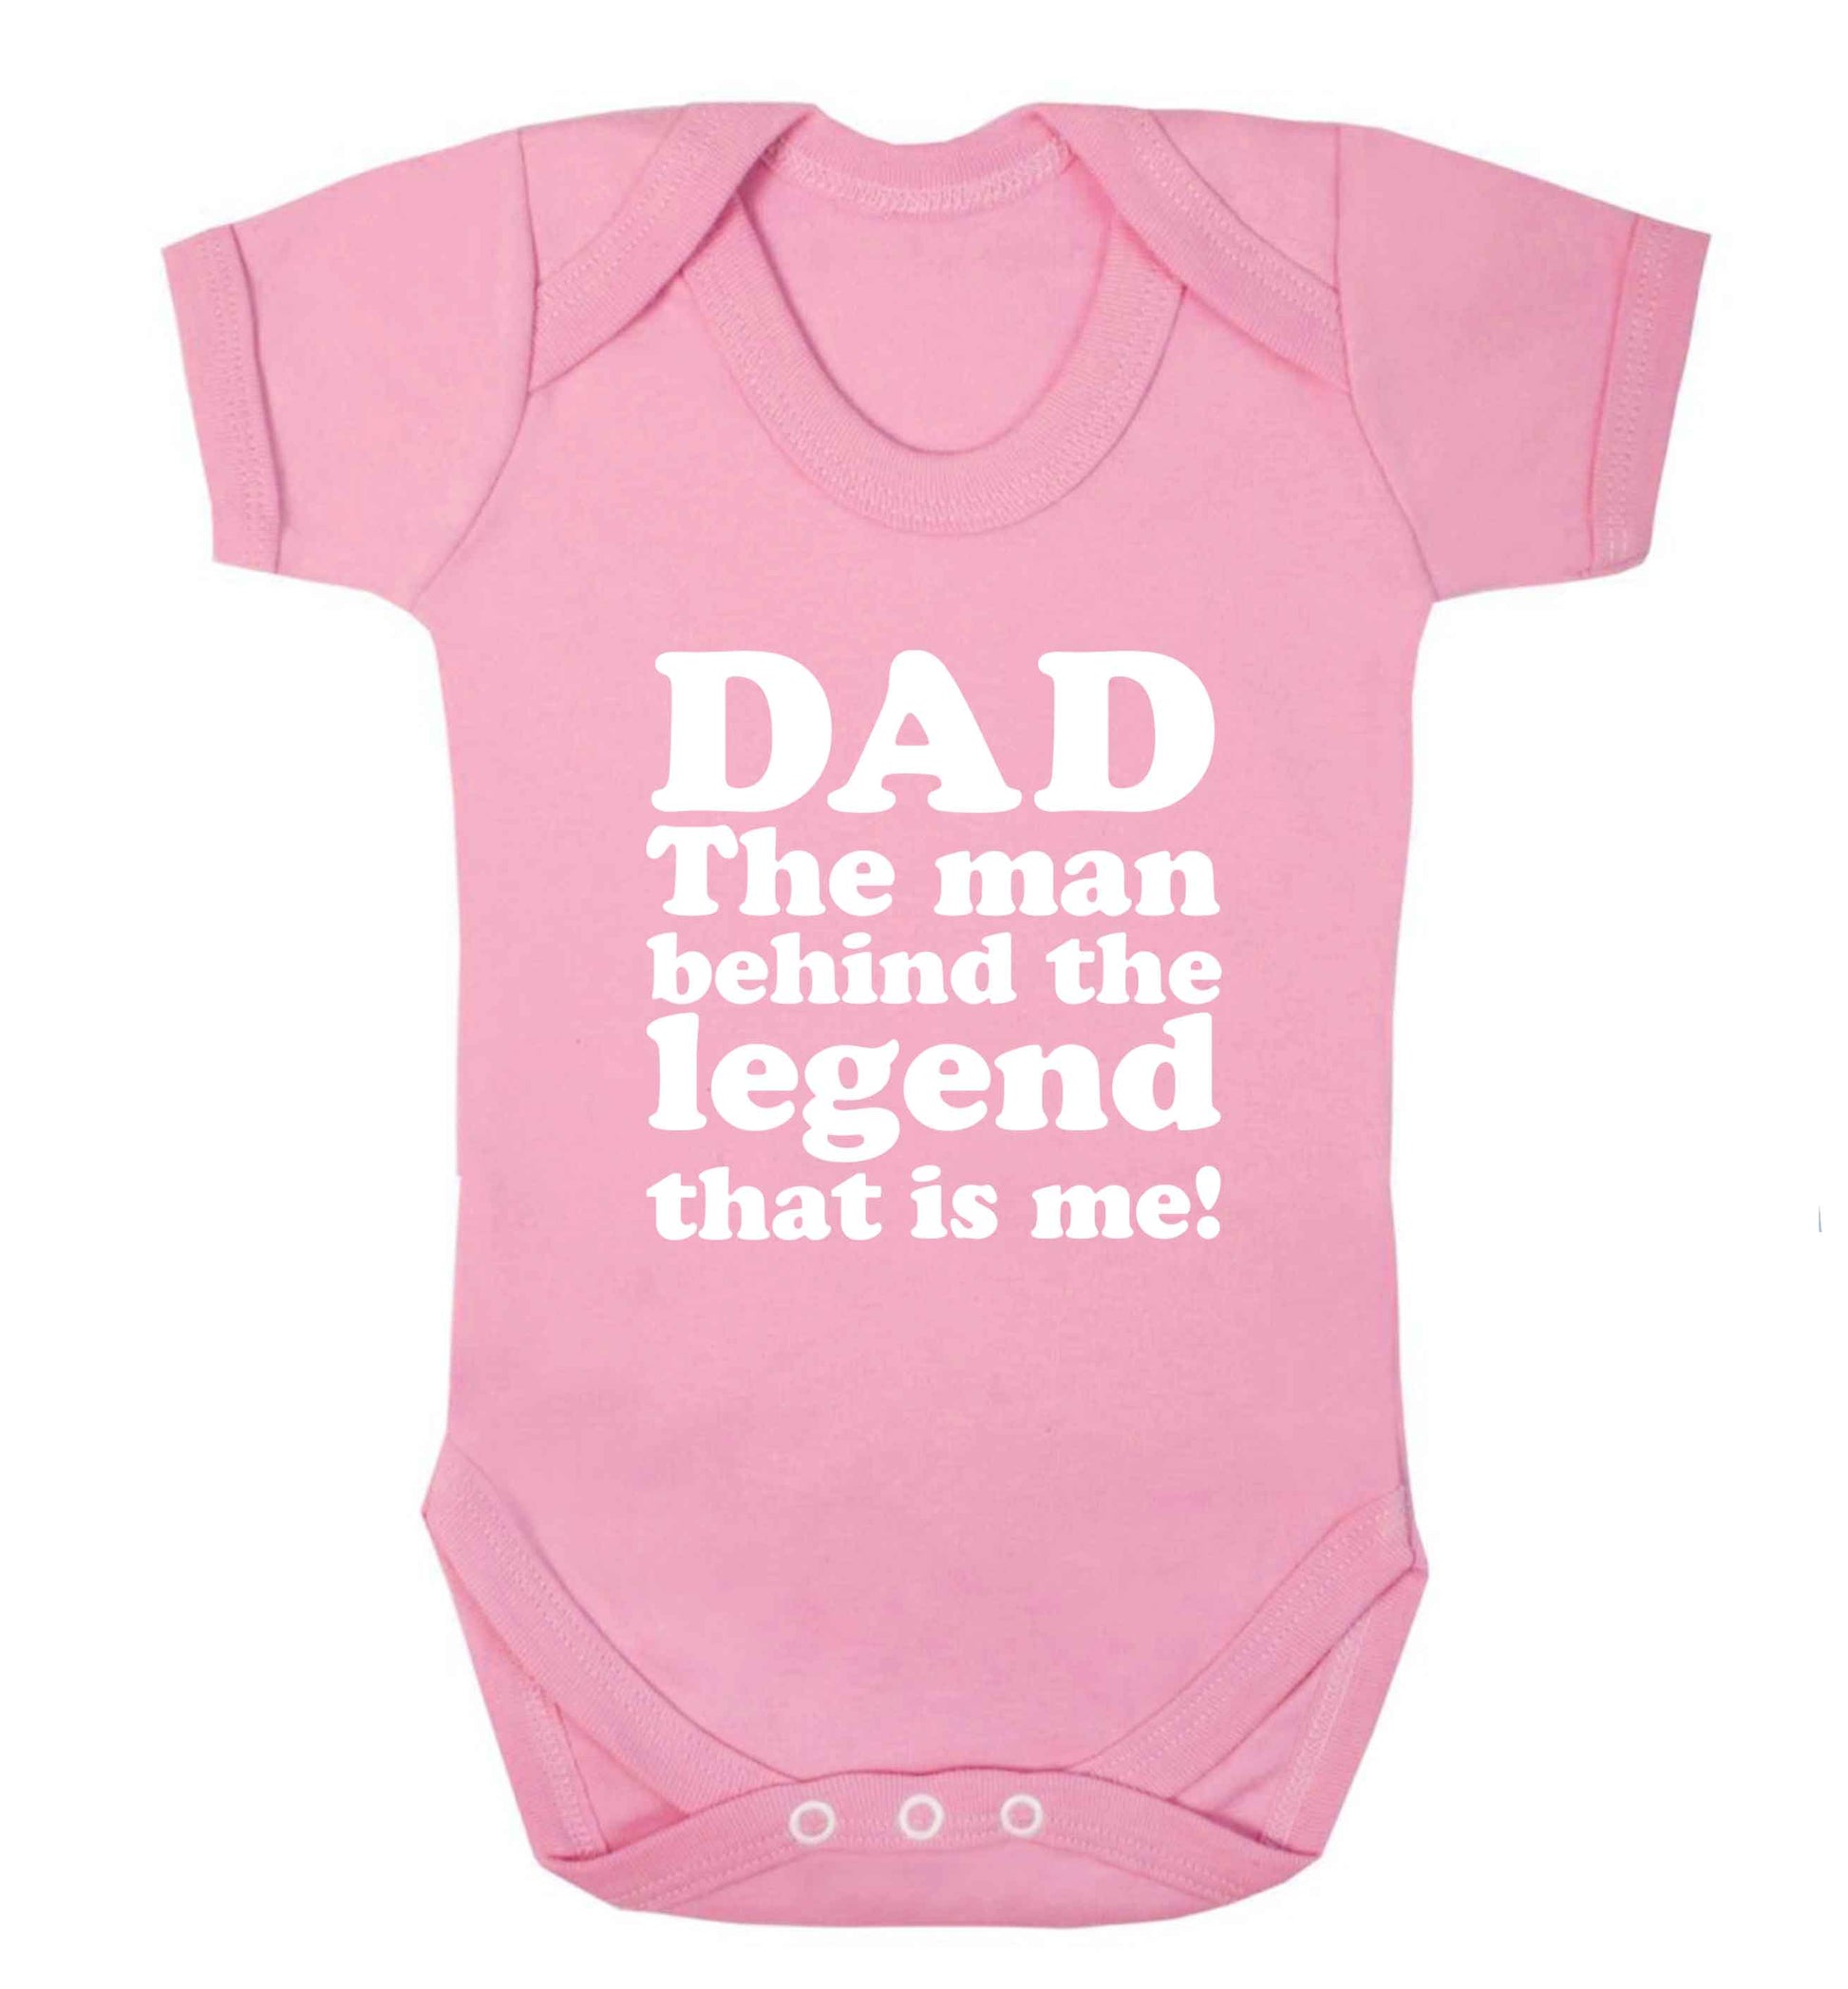 Dad the man behind the legend that is me baby vest pale pink 18-24 months